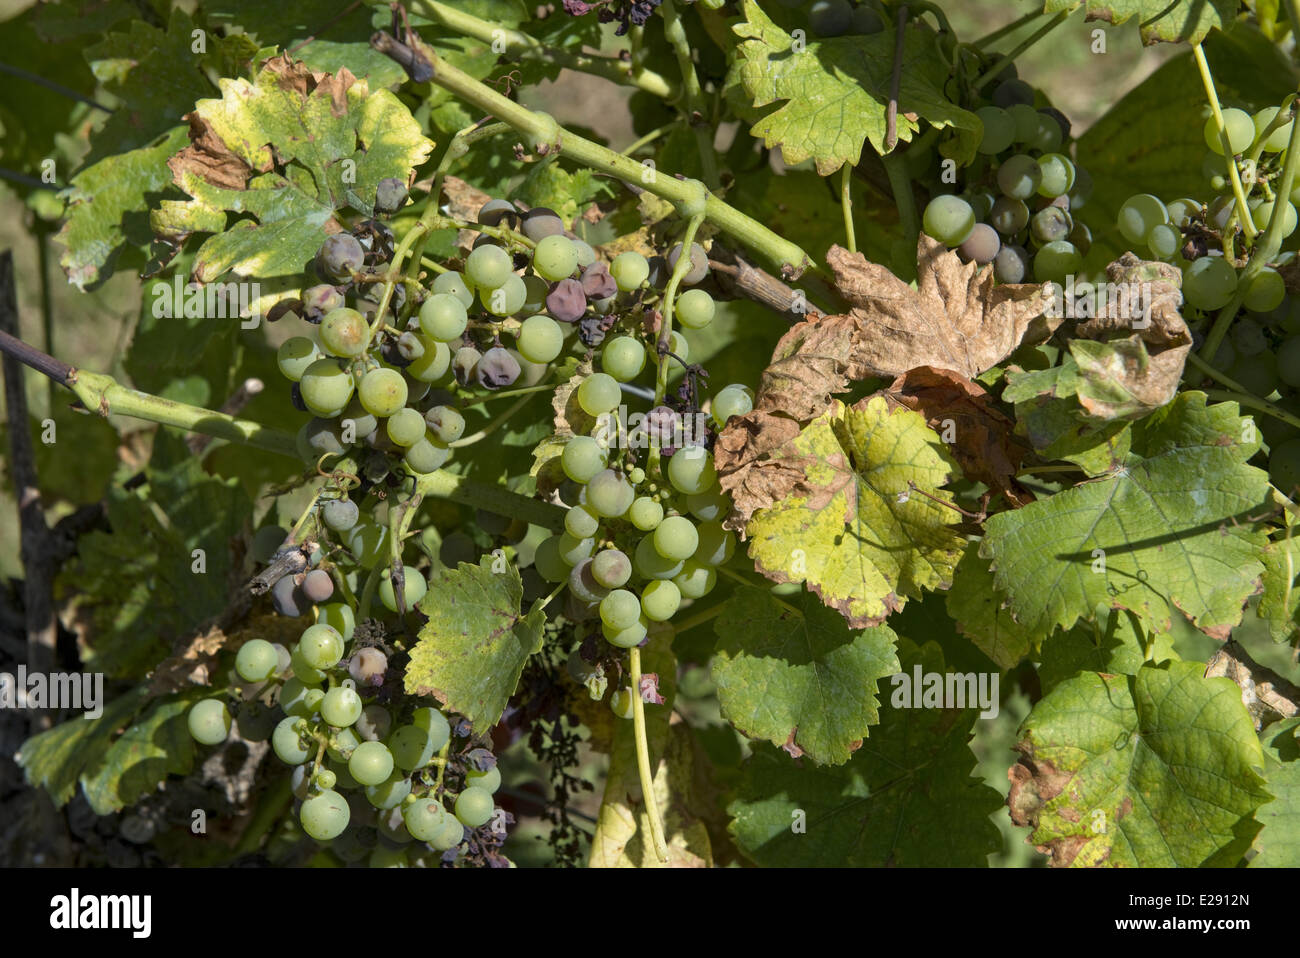 Noble rot or grey mould, Botrytis cinerea, on maturing grapes on the vine with evidence of a fungicidal spay deposit such as Bordeaux mixture on the leaves Stock Photo